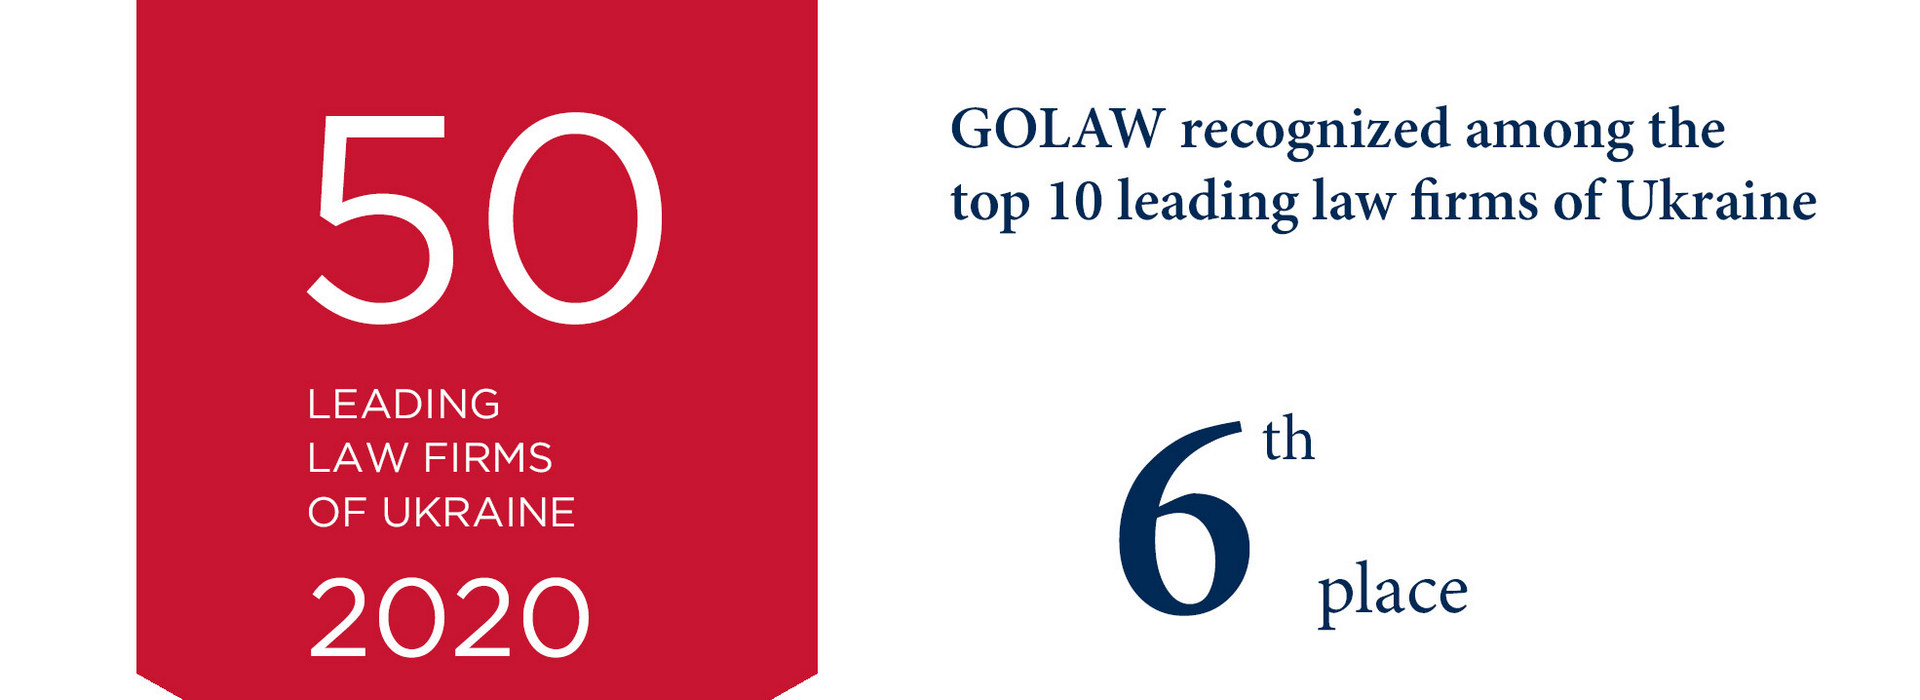 GOLAW Recognized Among the Top 10 Leading Law Firms of Ukraine